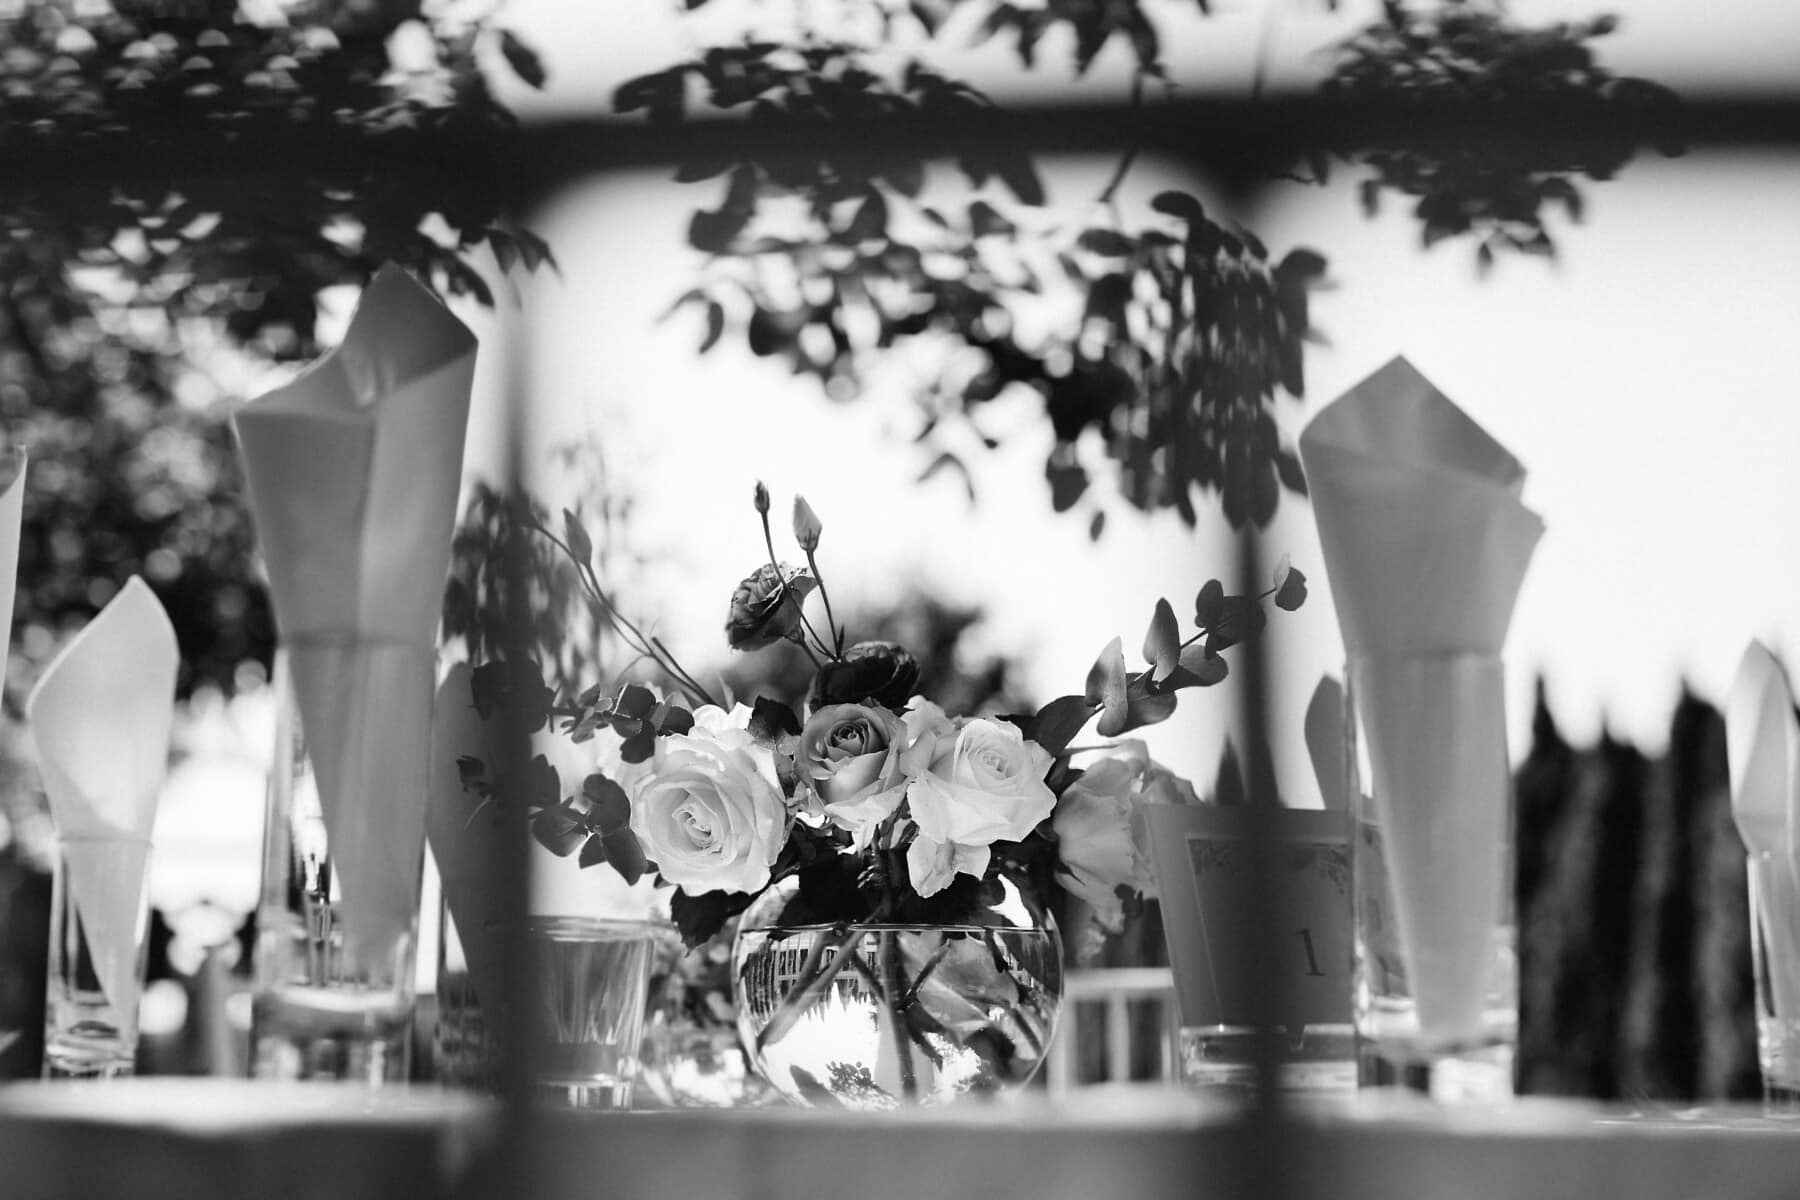 dining area, outdoor, roses, bowl, vase, bouquet, monochrome, table, napkin, tablecloth